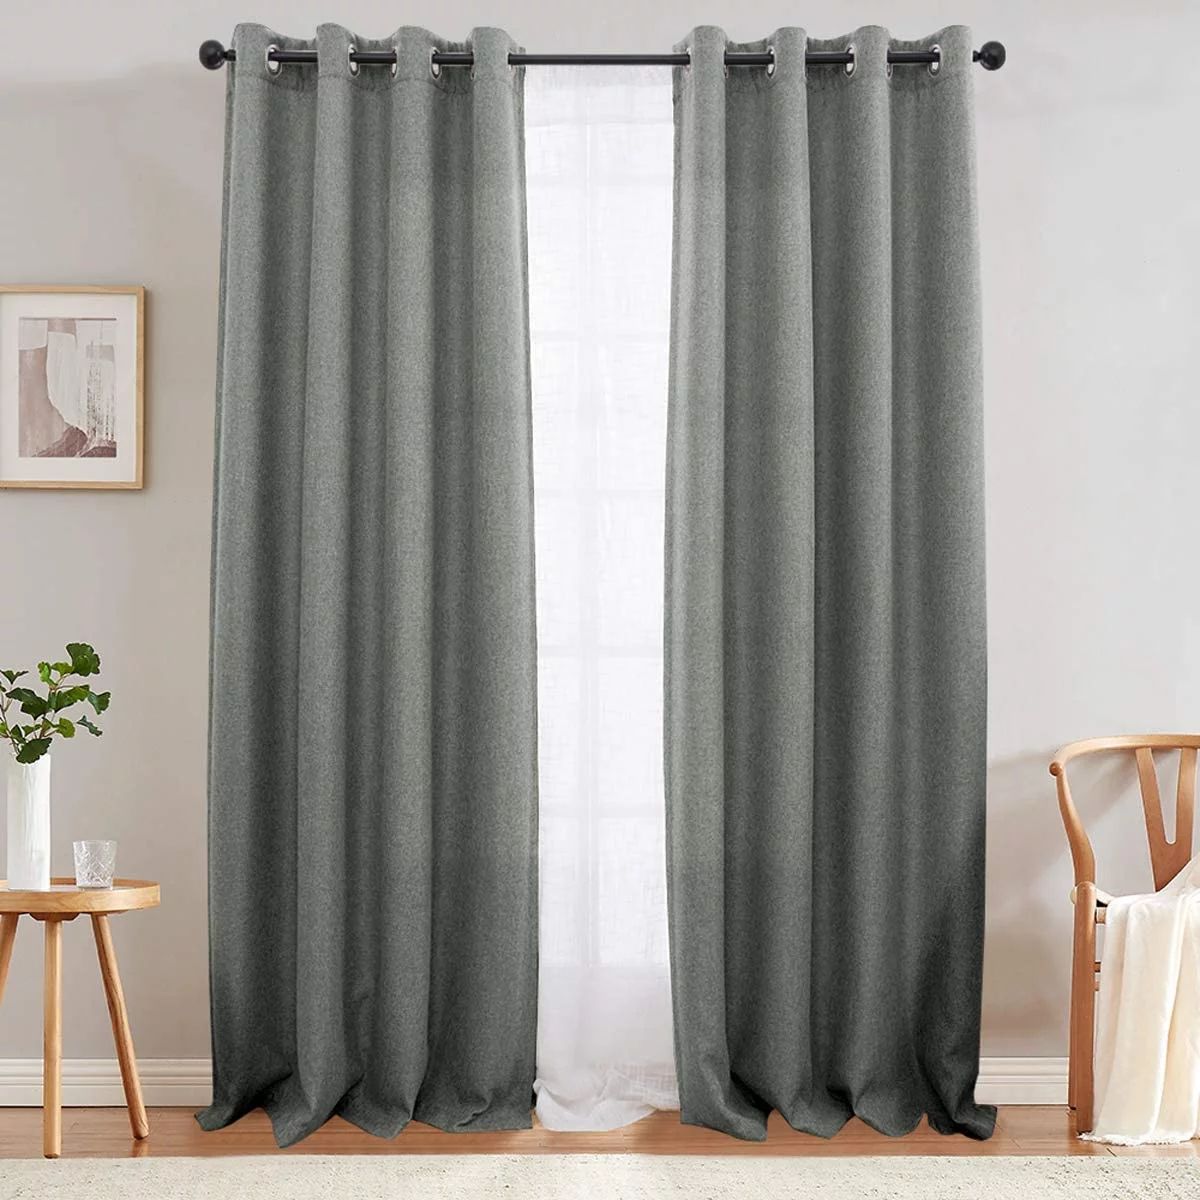 CURTAINKING Room Darkening Curtains 84 inches Grey Faux Linen Curtains Bedroom Living Room Window... | Walmart (US)